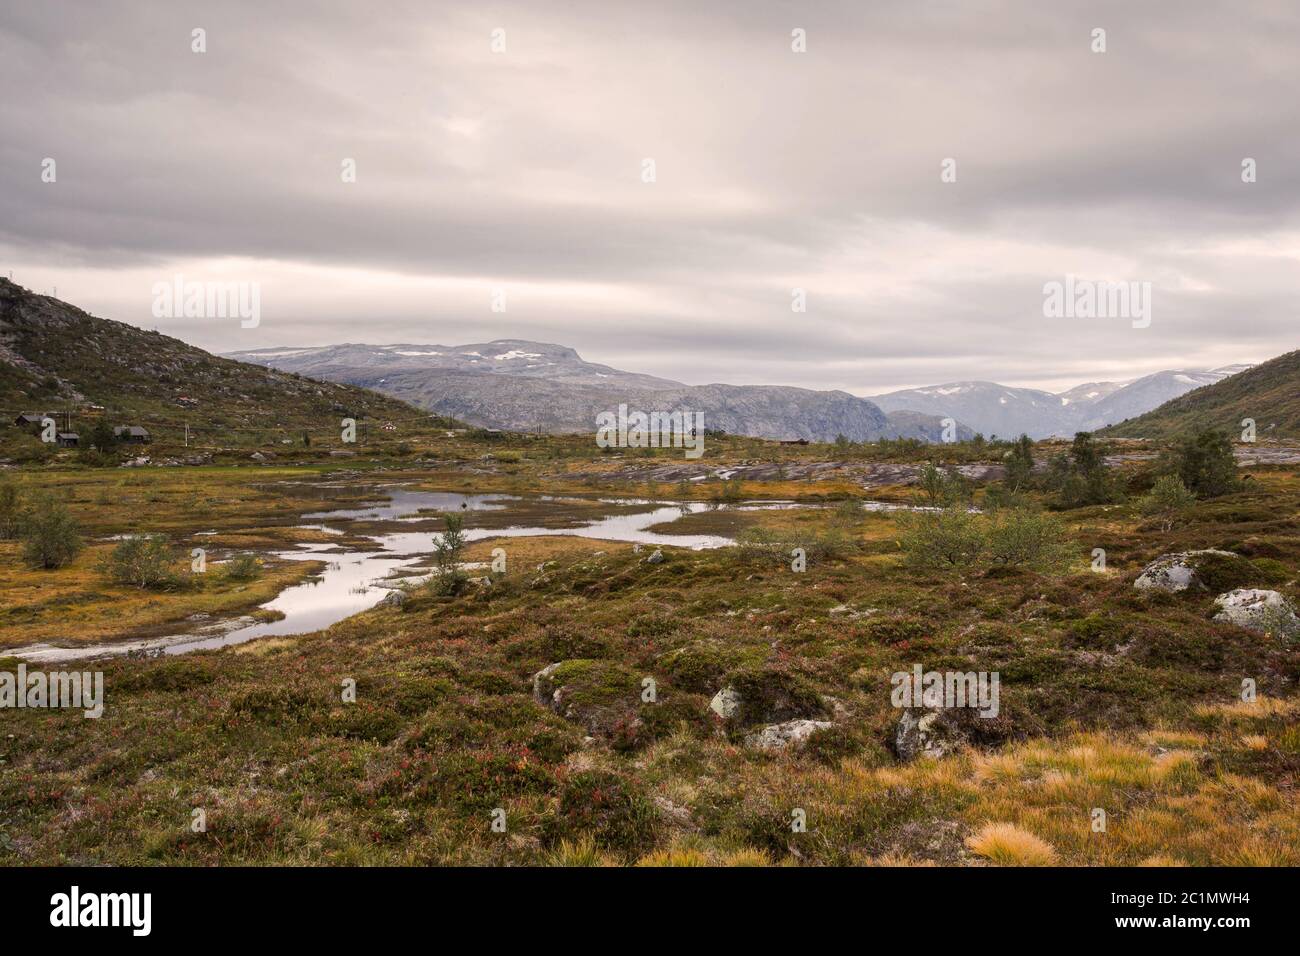 rugged wild mountain landscape in norway cloudy and calm river Stock Photo